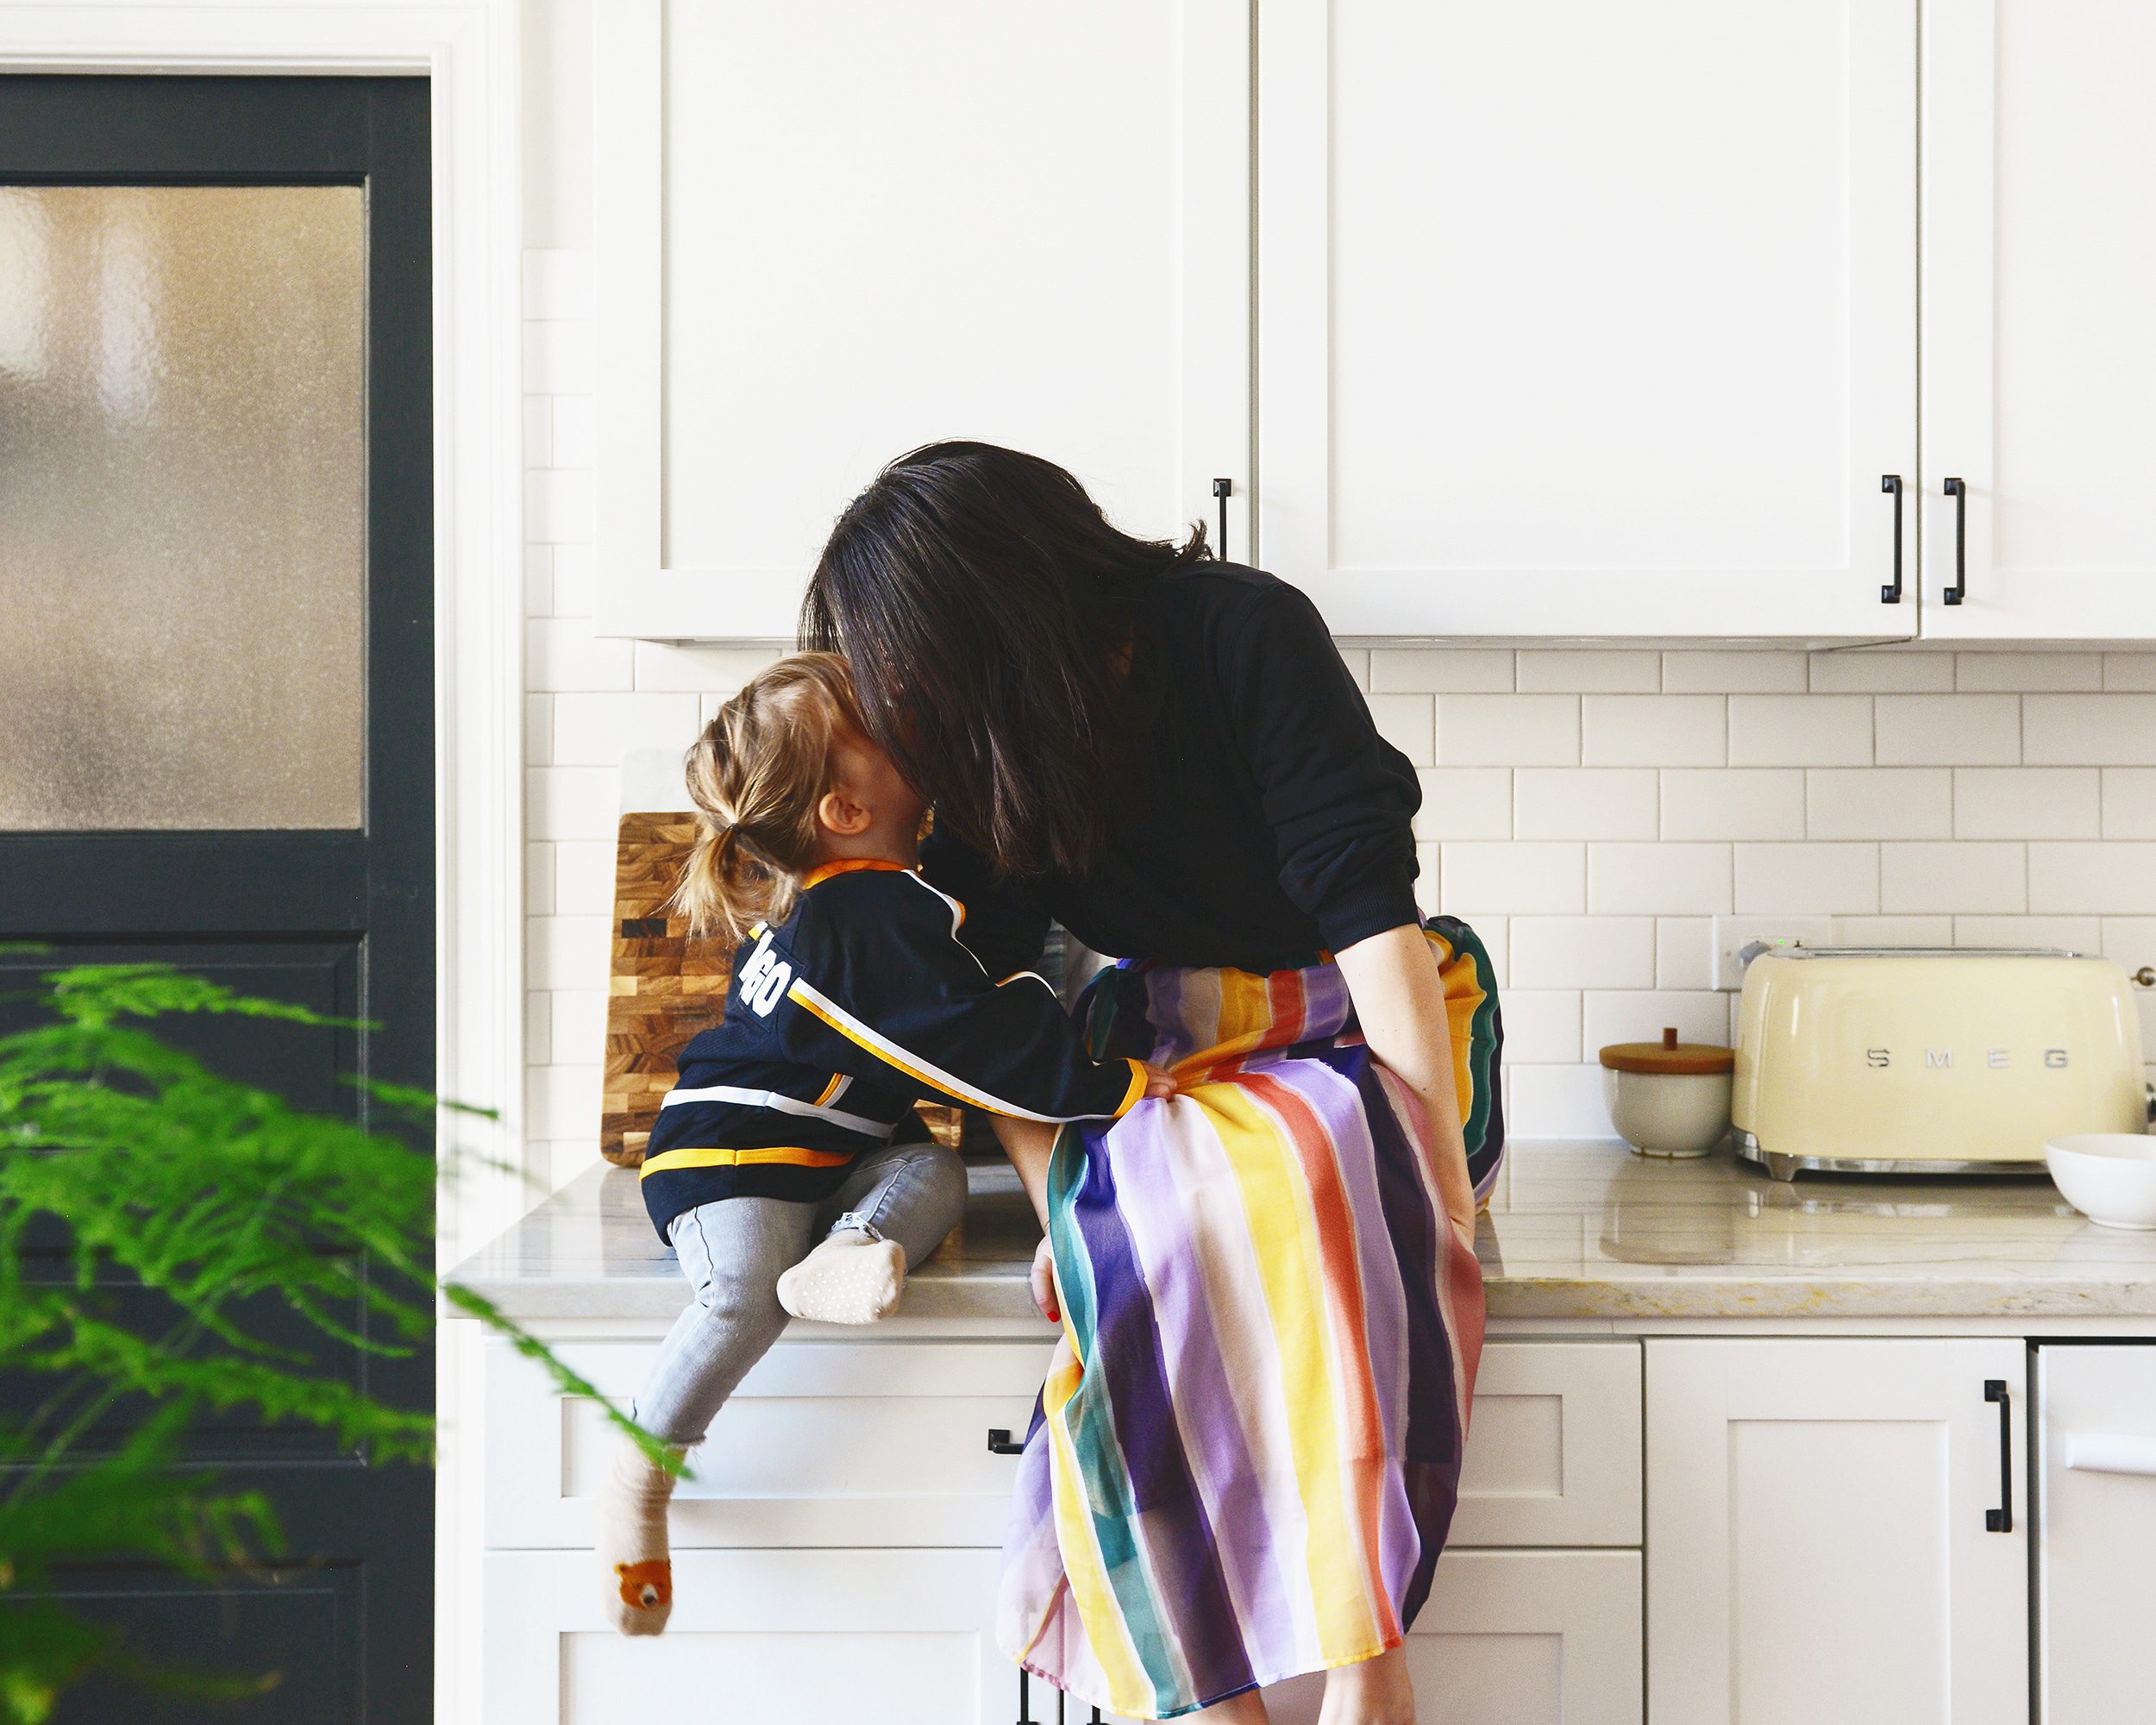 Kim and Lucy give kisses from the kitchen counter, Lucy wears her favorite Penguins jersey and Kim wears a rainbow skirt | via Yellow Brick Home